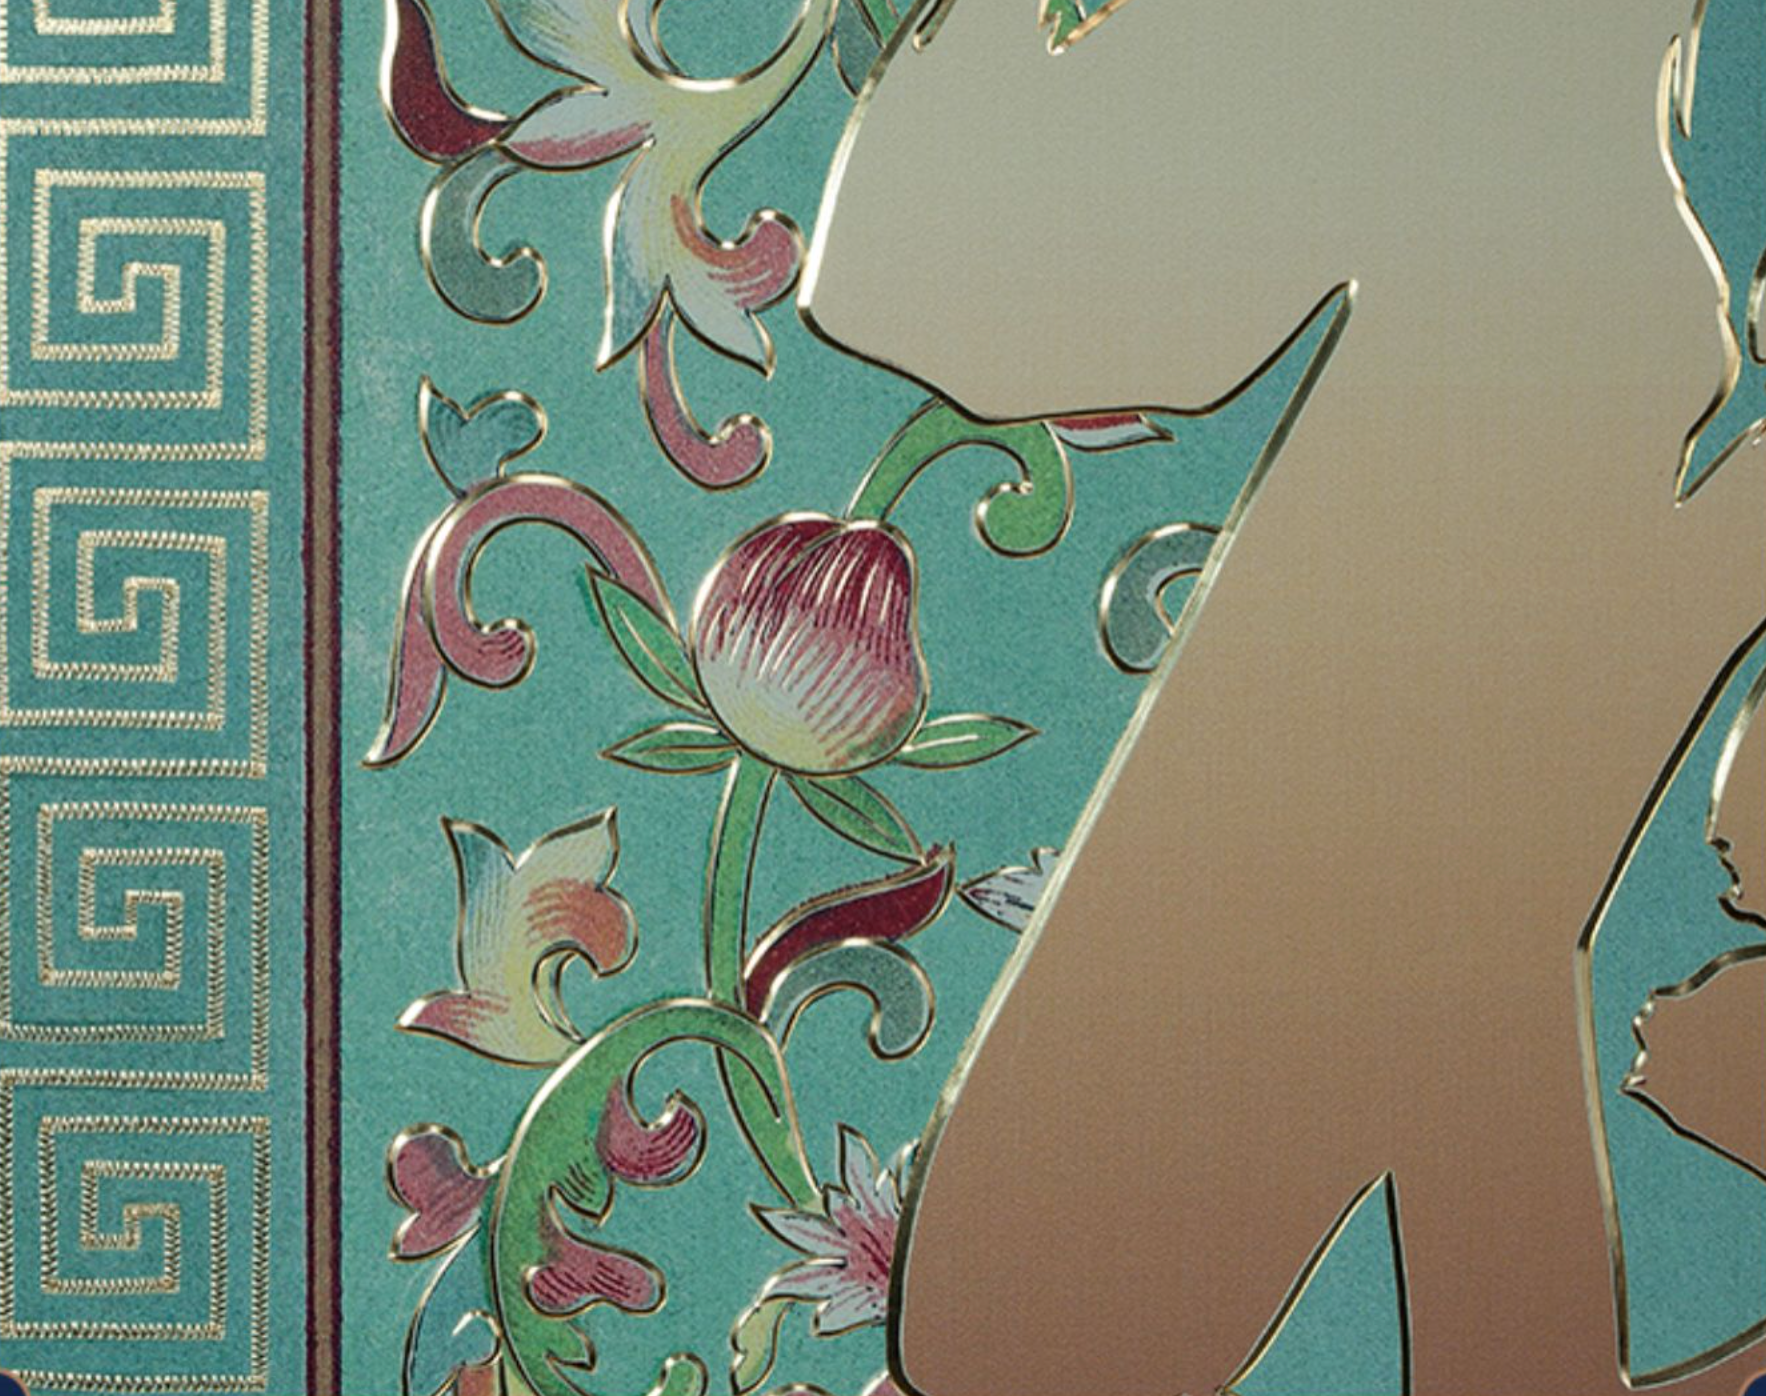 Brass Sculpture Painting(Chinese Kangxi Emperor Wrote The Fu Word) - Morrow Land